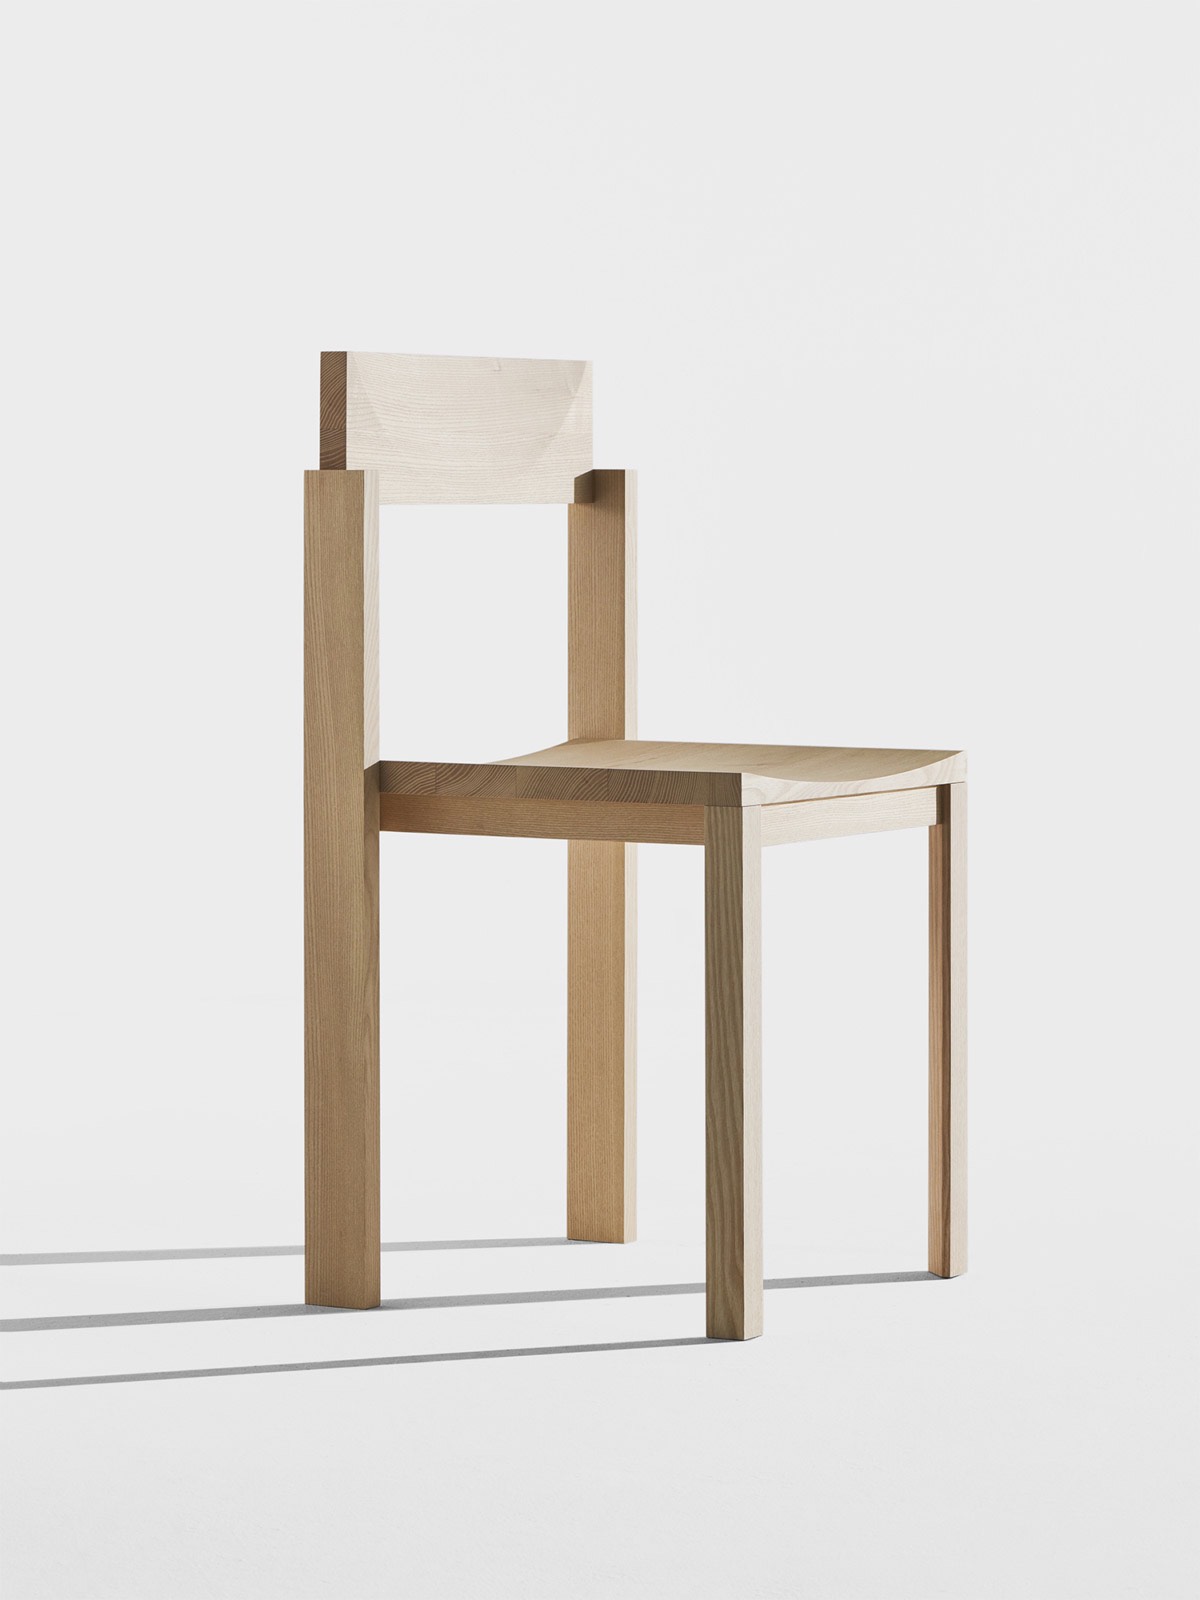 Minimalist Chair Design: Mai chair by Anthony Guex